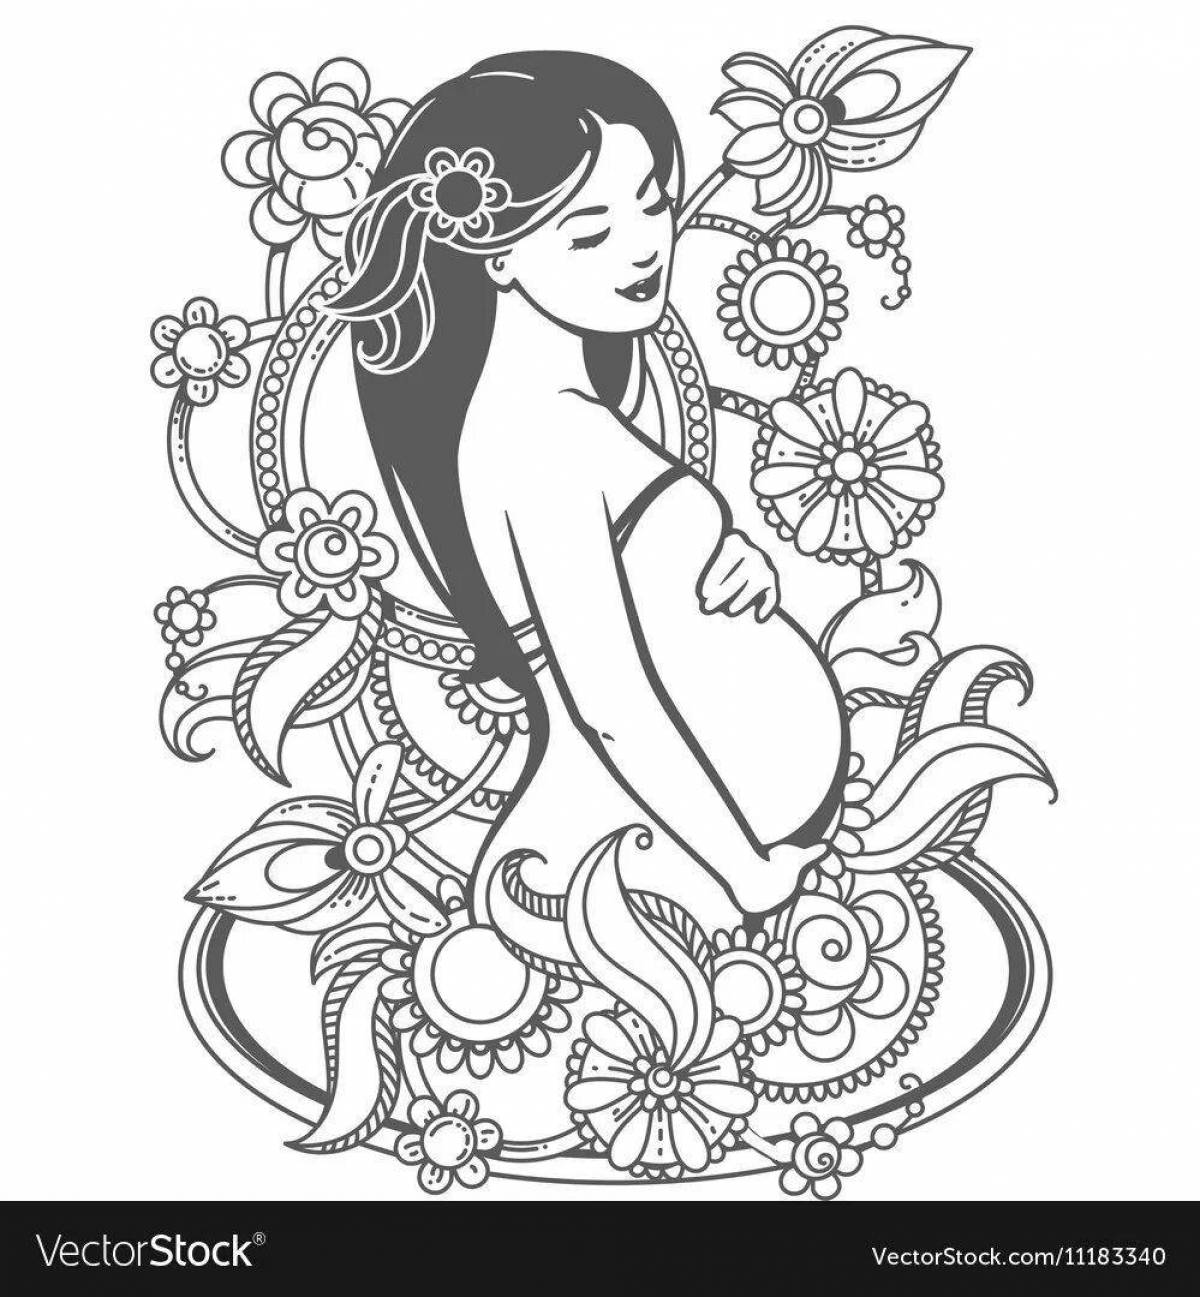 Radiant coloring book for pregnant women antistress